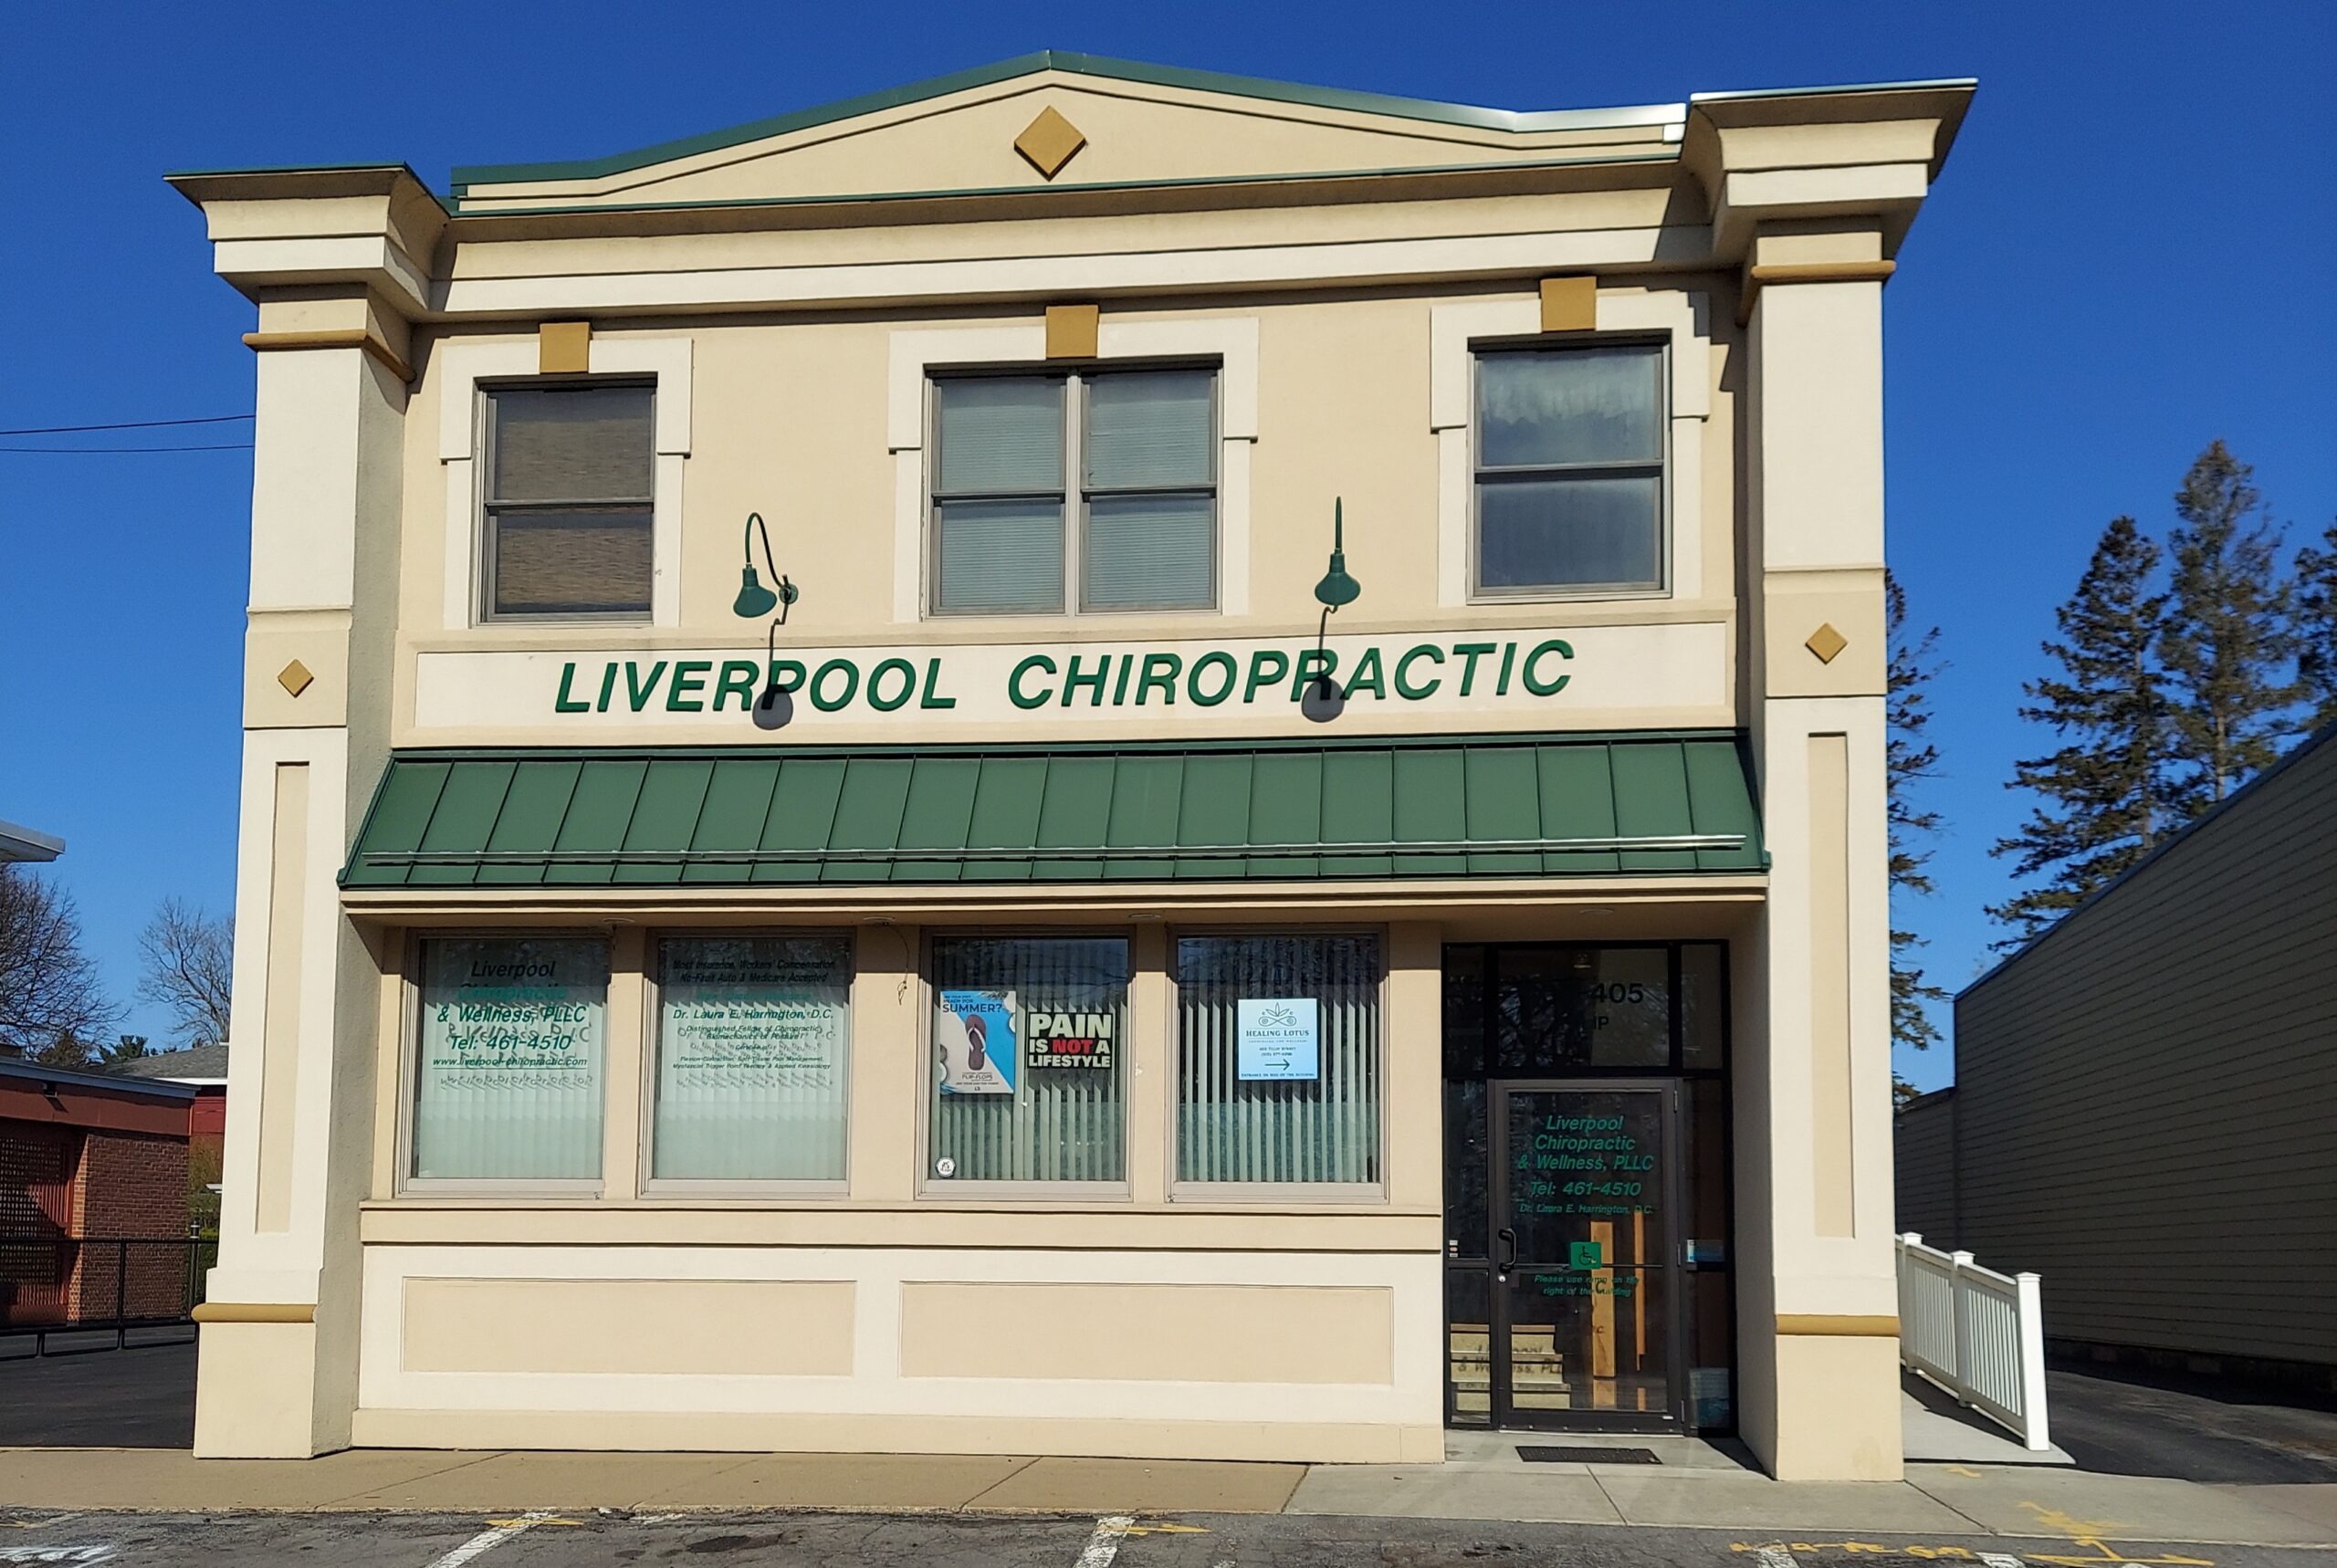 Liverpool Chiropractic and Wellness office building at 403 Tulip Street, Liverpool, New York